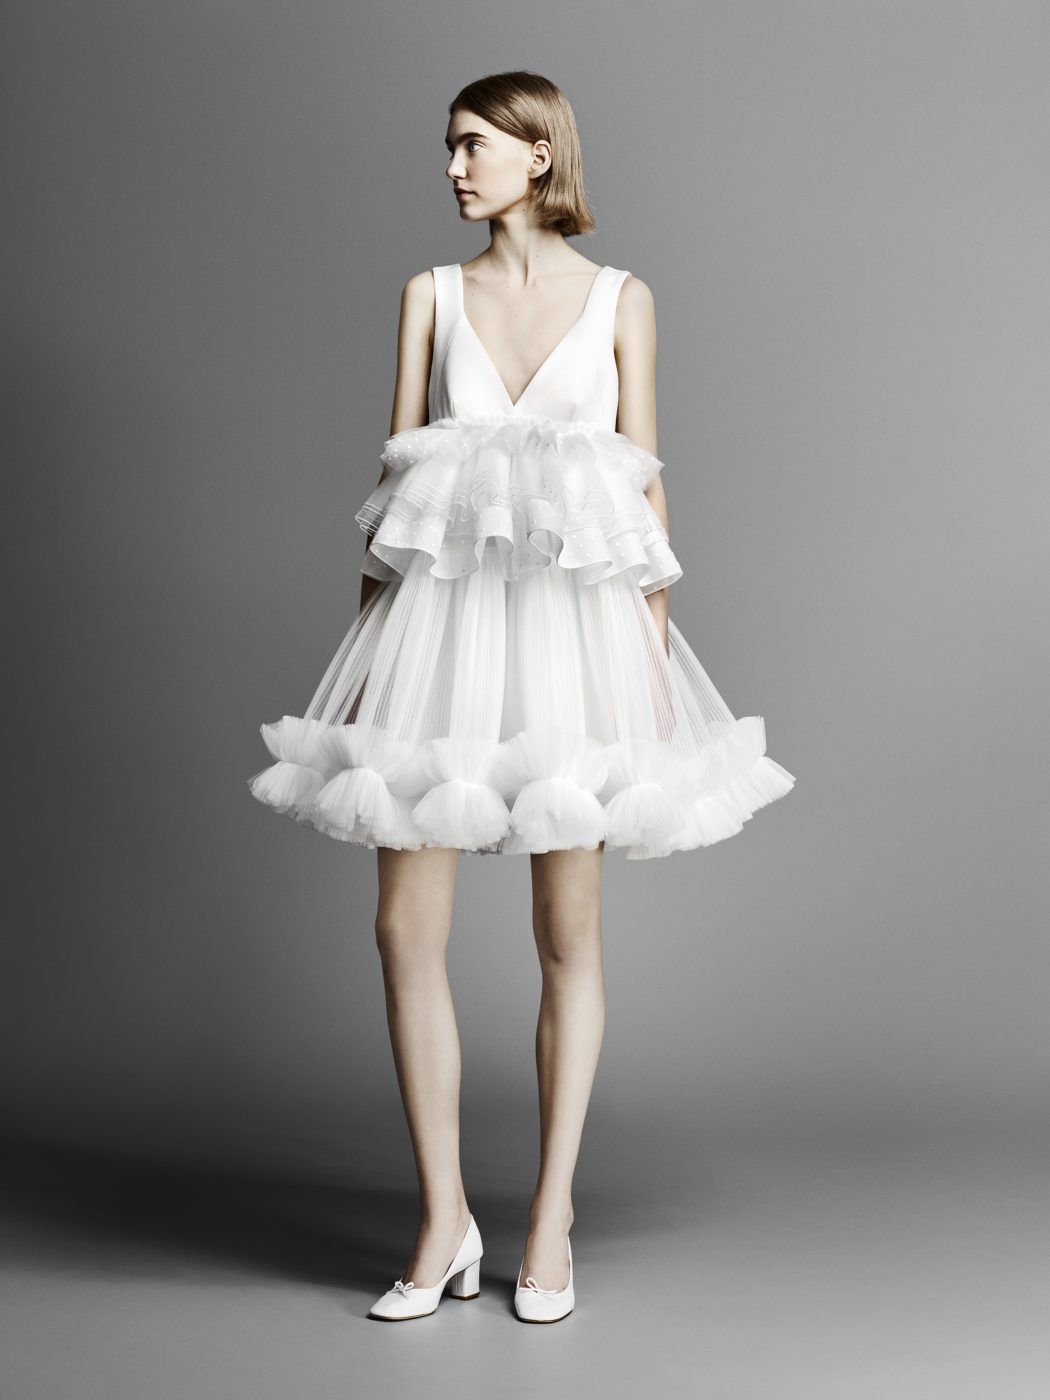 viktor-rolf-collection-robe-mariee-printemps-2019-millemariages-15